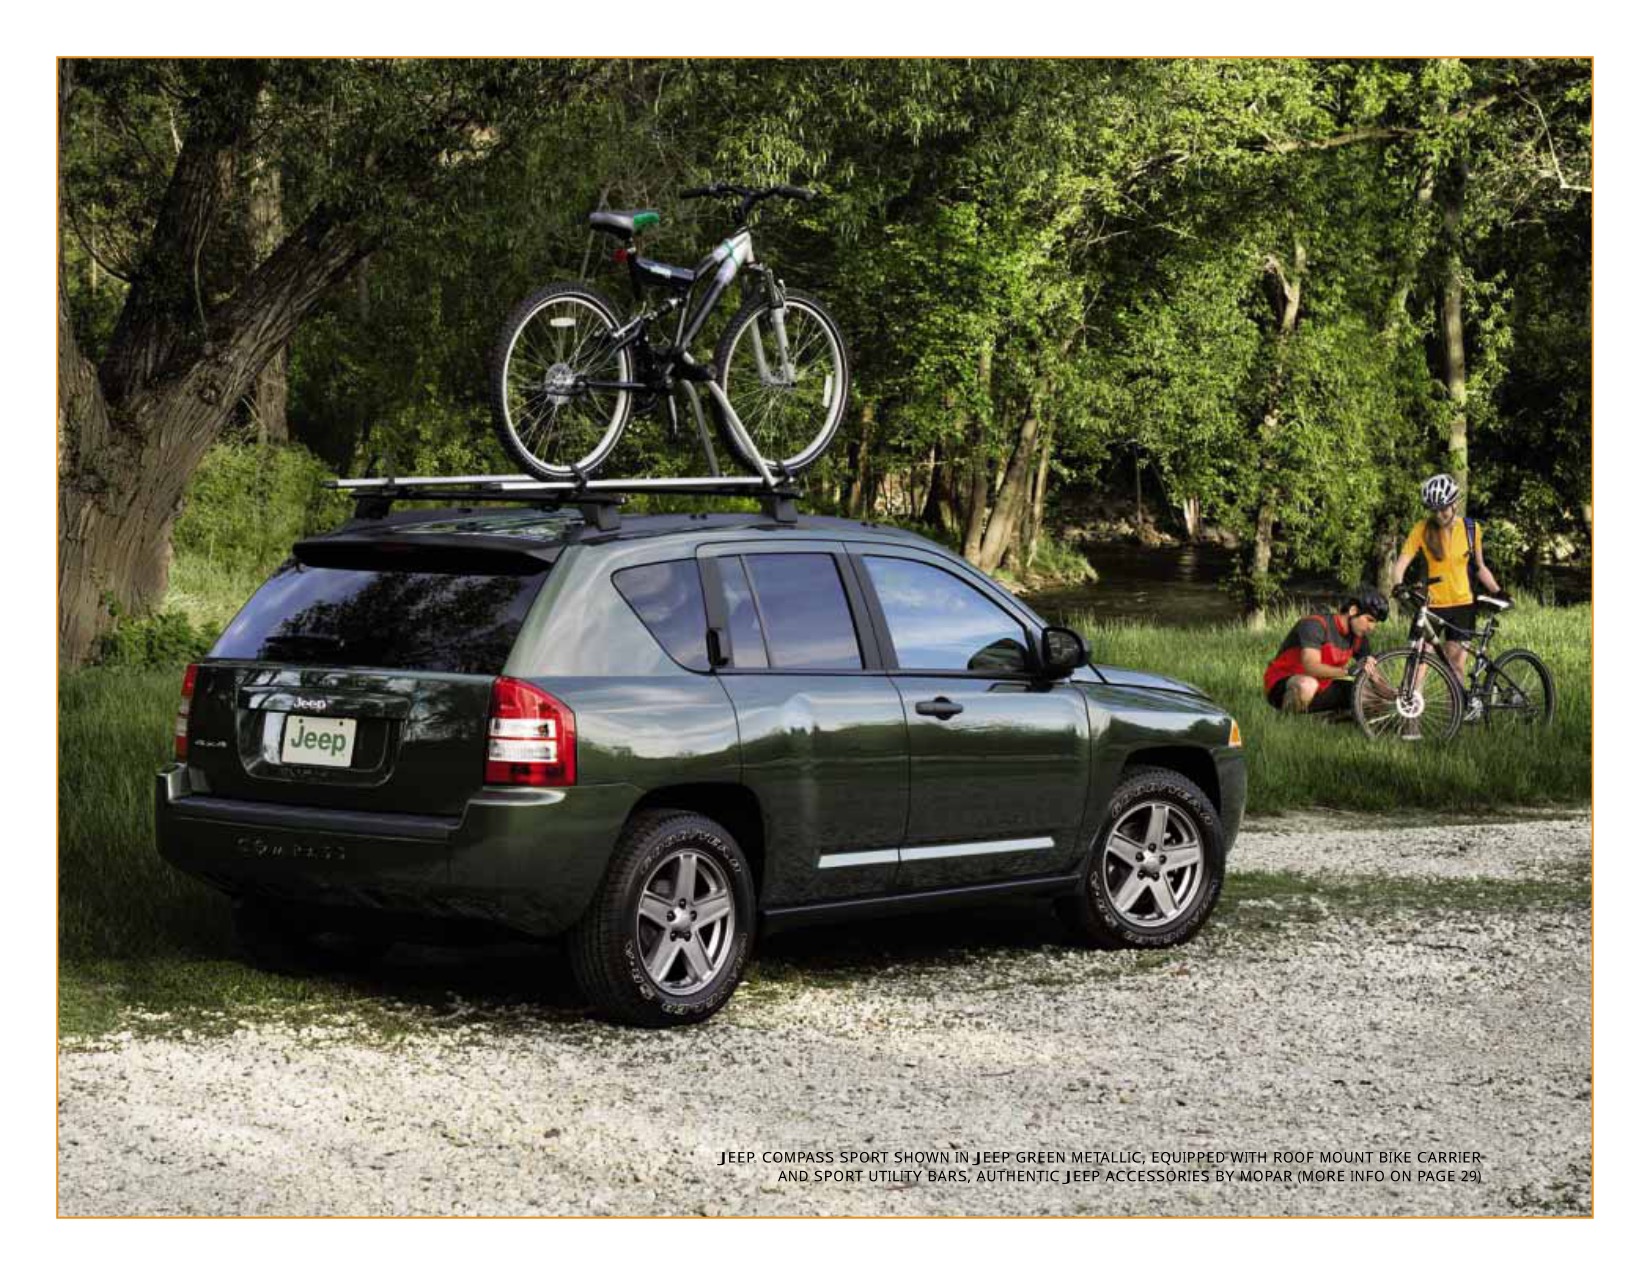 2008 Jeep Compass Brochure Page 8